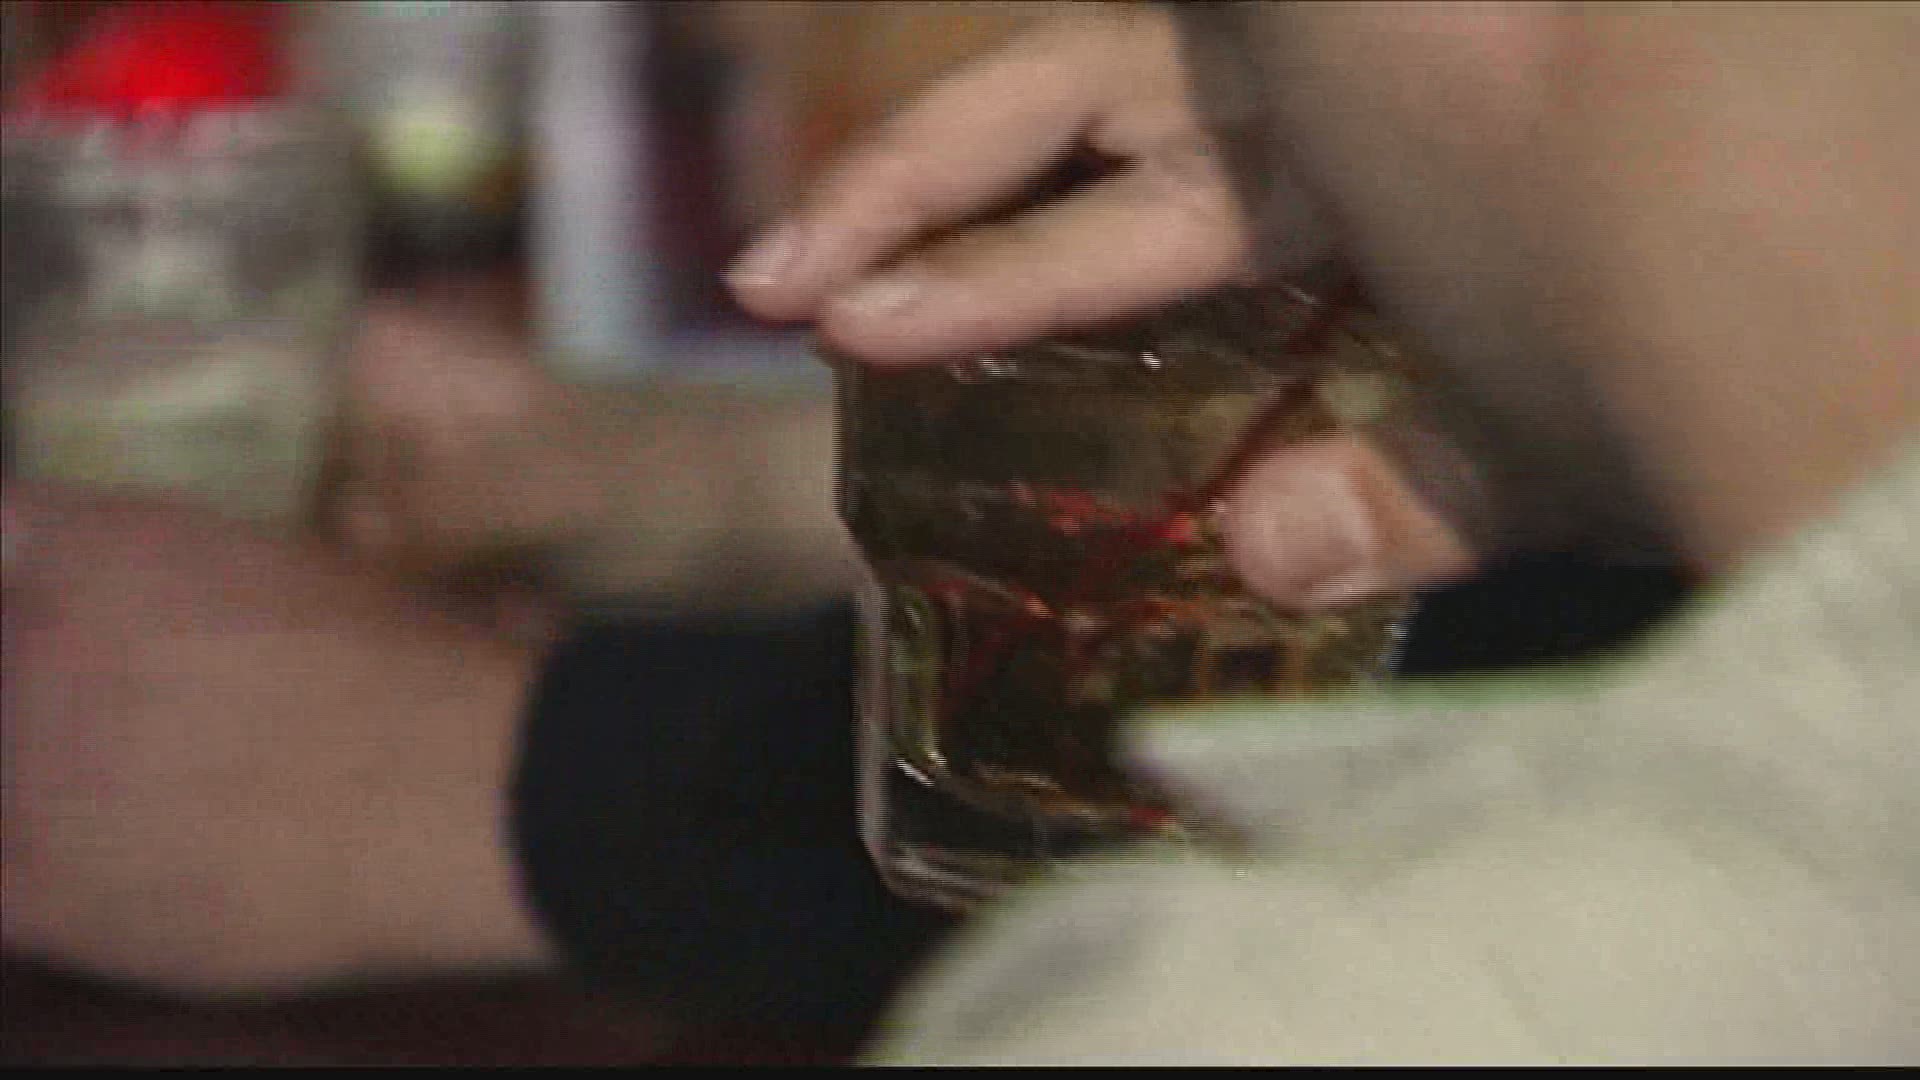 A new survey shows more Alabamians are reaching for alcohol at home during the pandemic. Local counselor says this habit could quickly become dangerous.